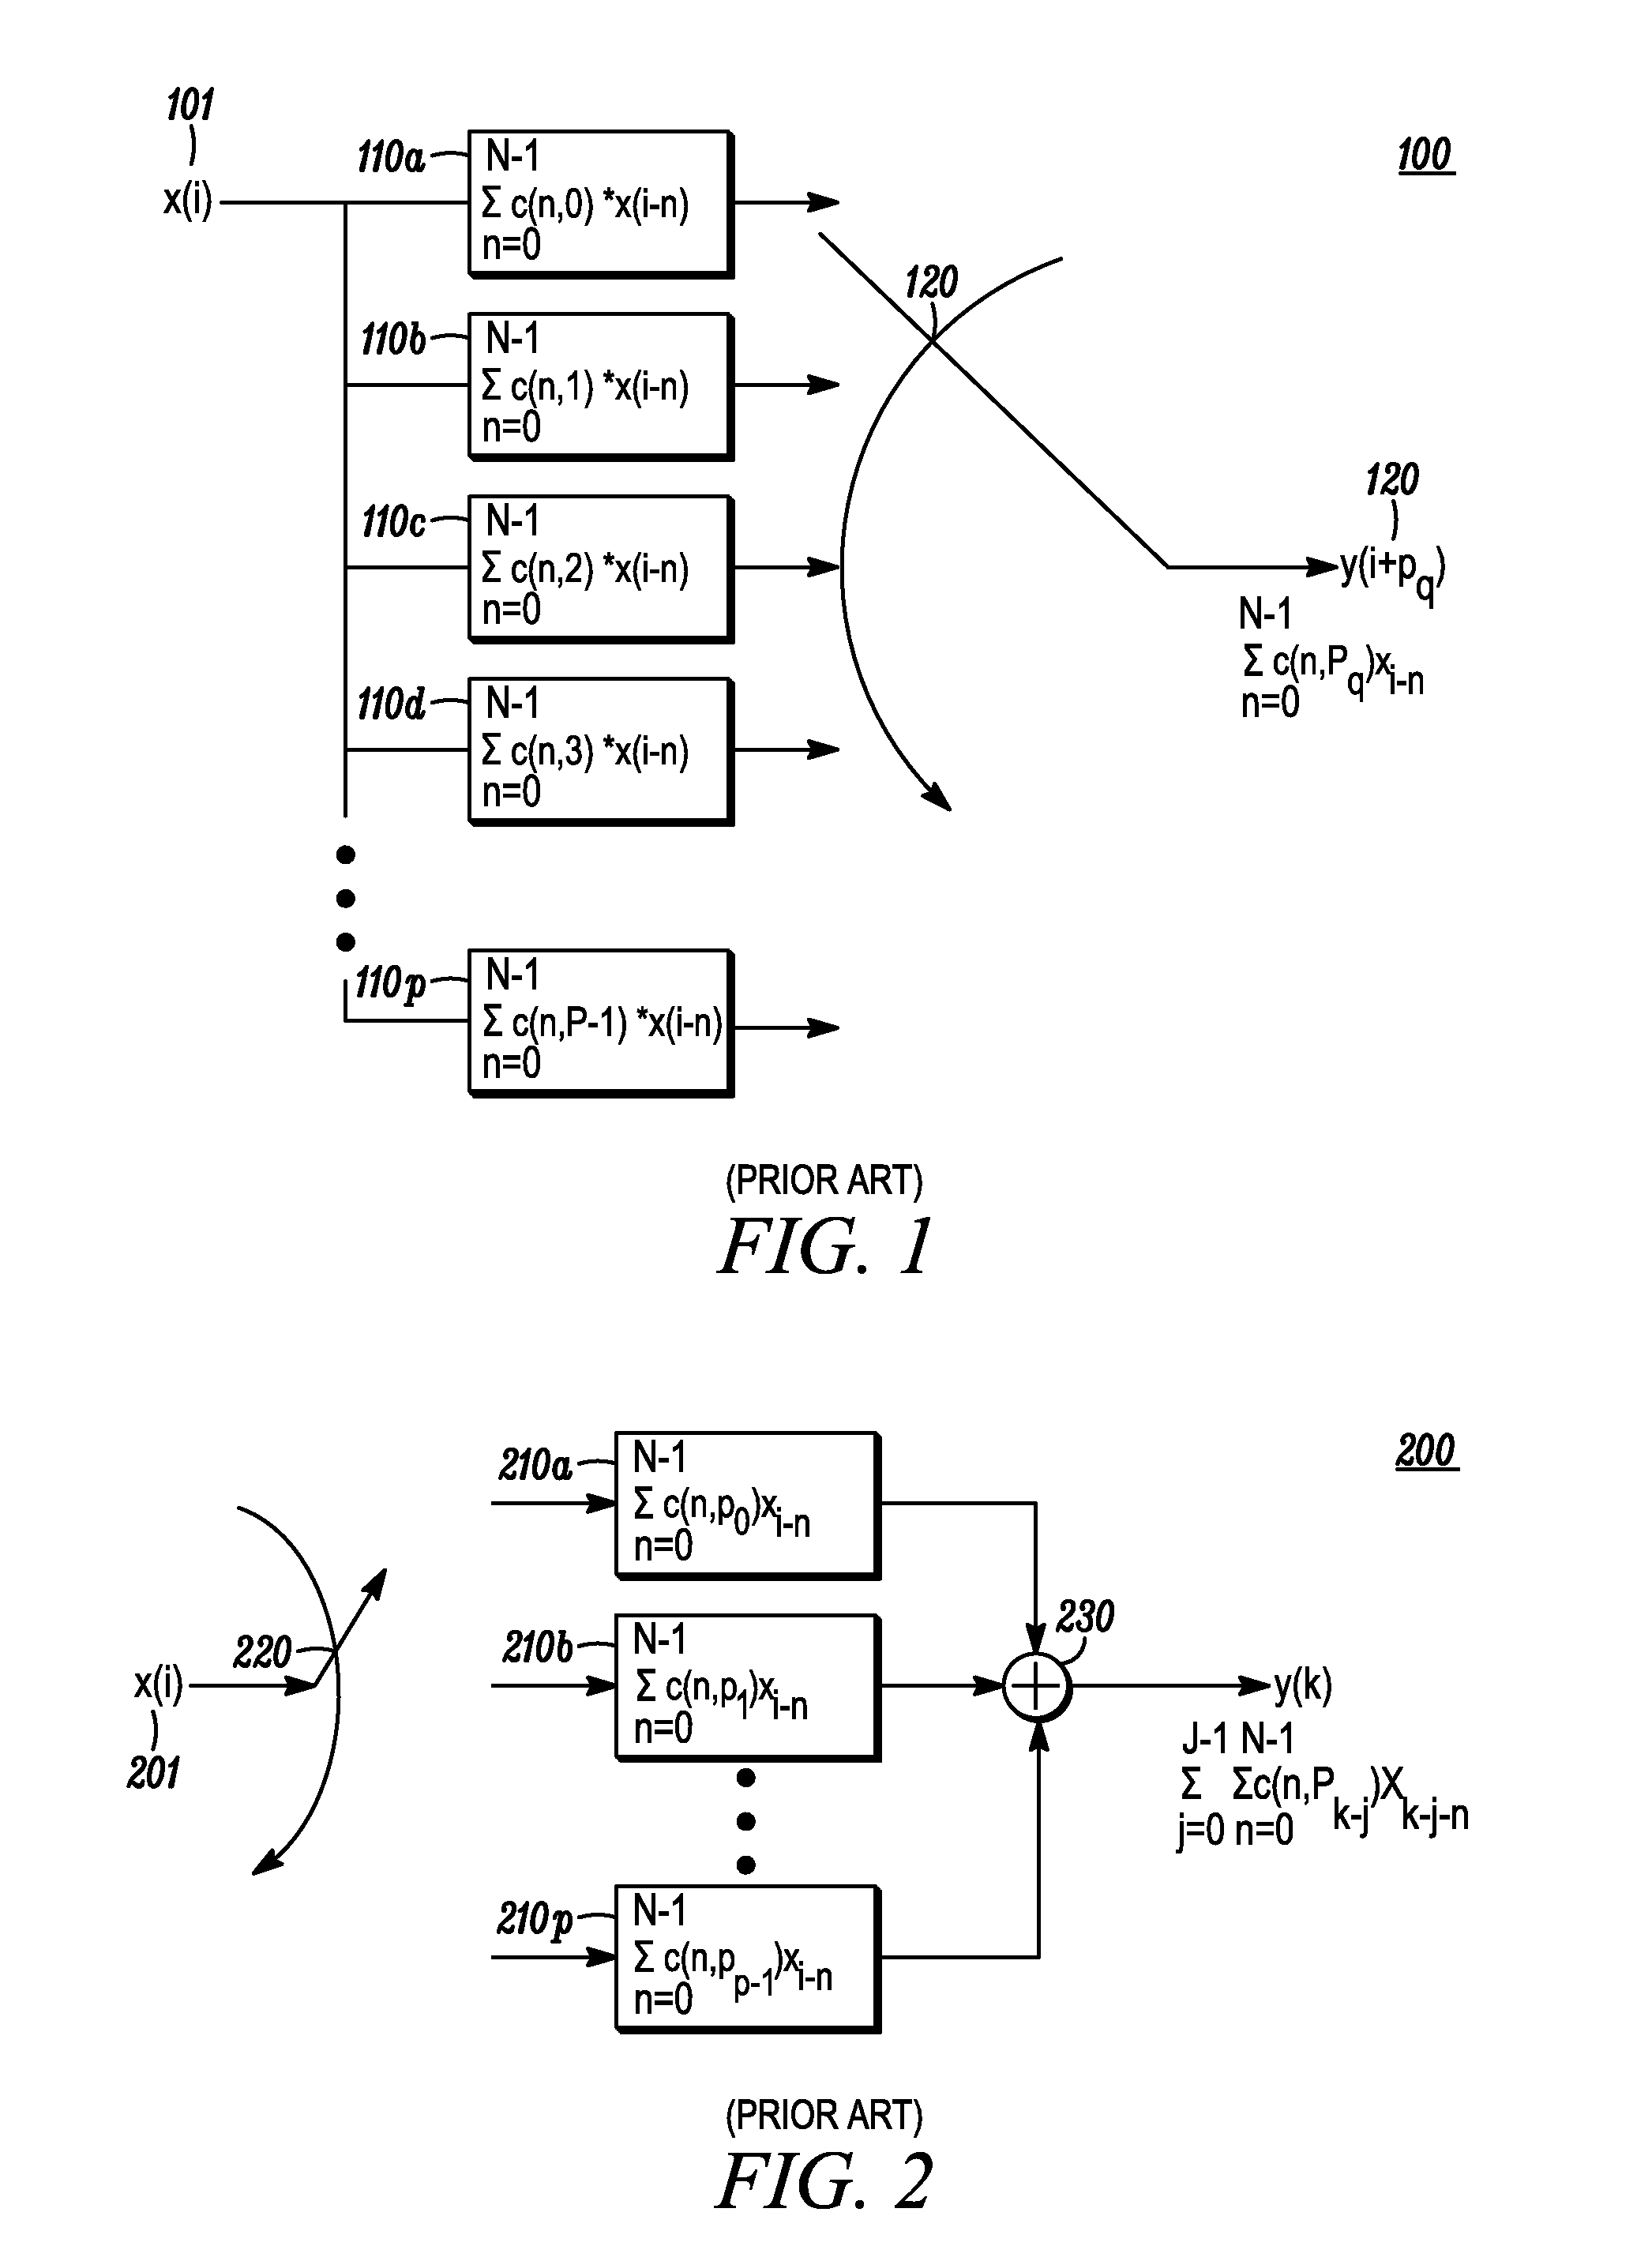 Polyphase filter with optimized silicon area